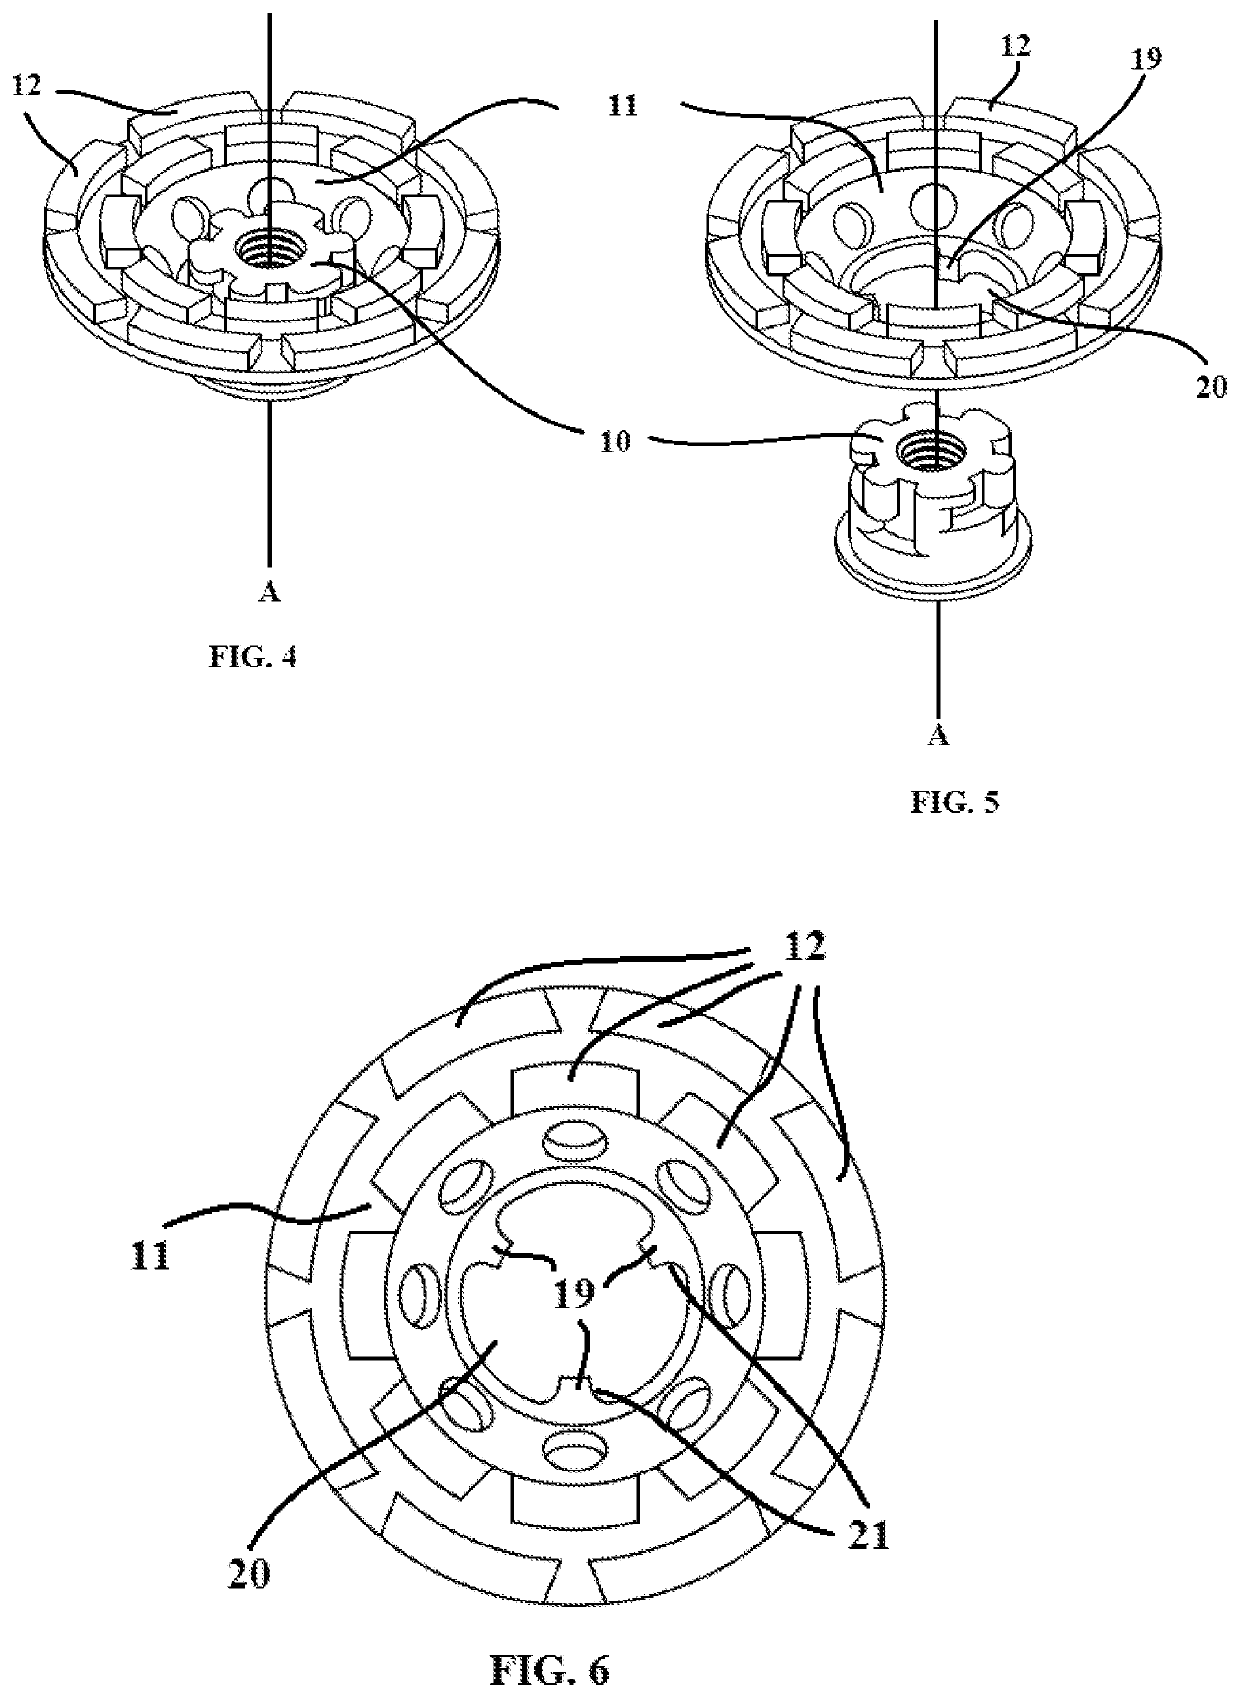 Depth adjustable hub for use with abrasive grinding tool